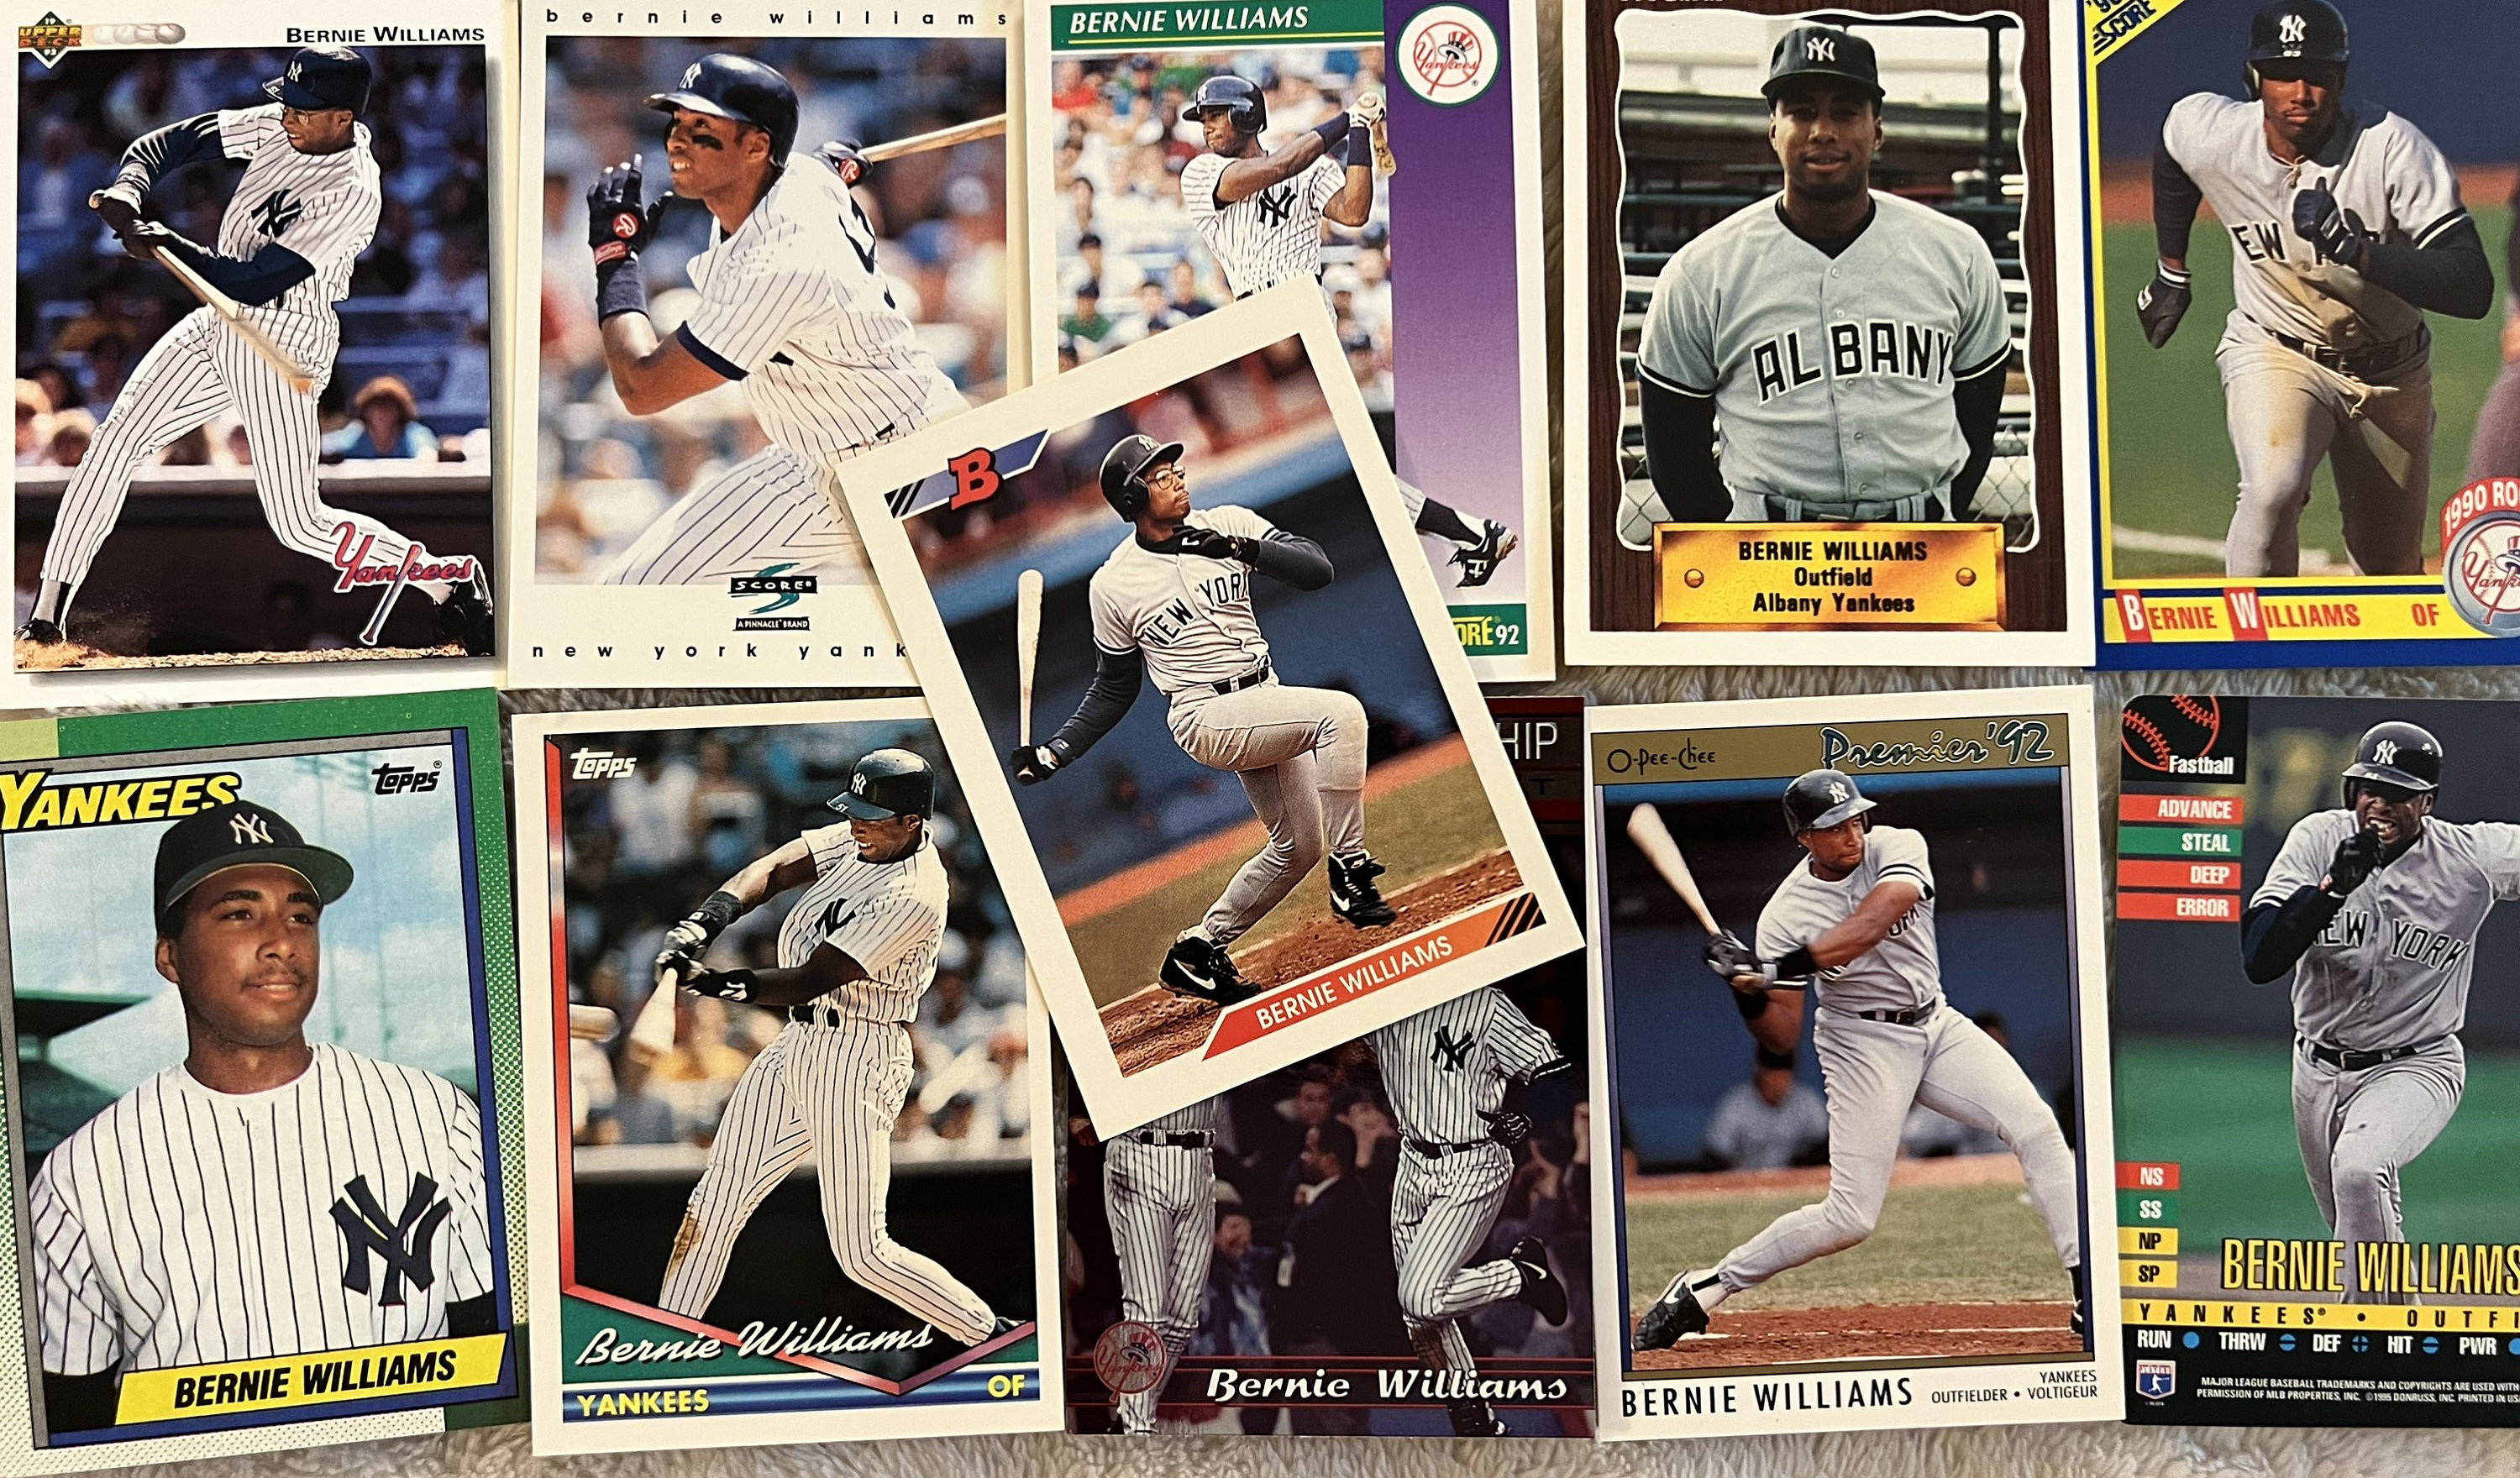 11 Different Bernie Williams Cards Includes 2 Rcs and Minor 